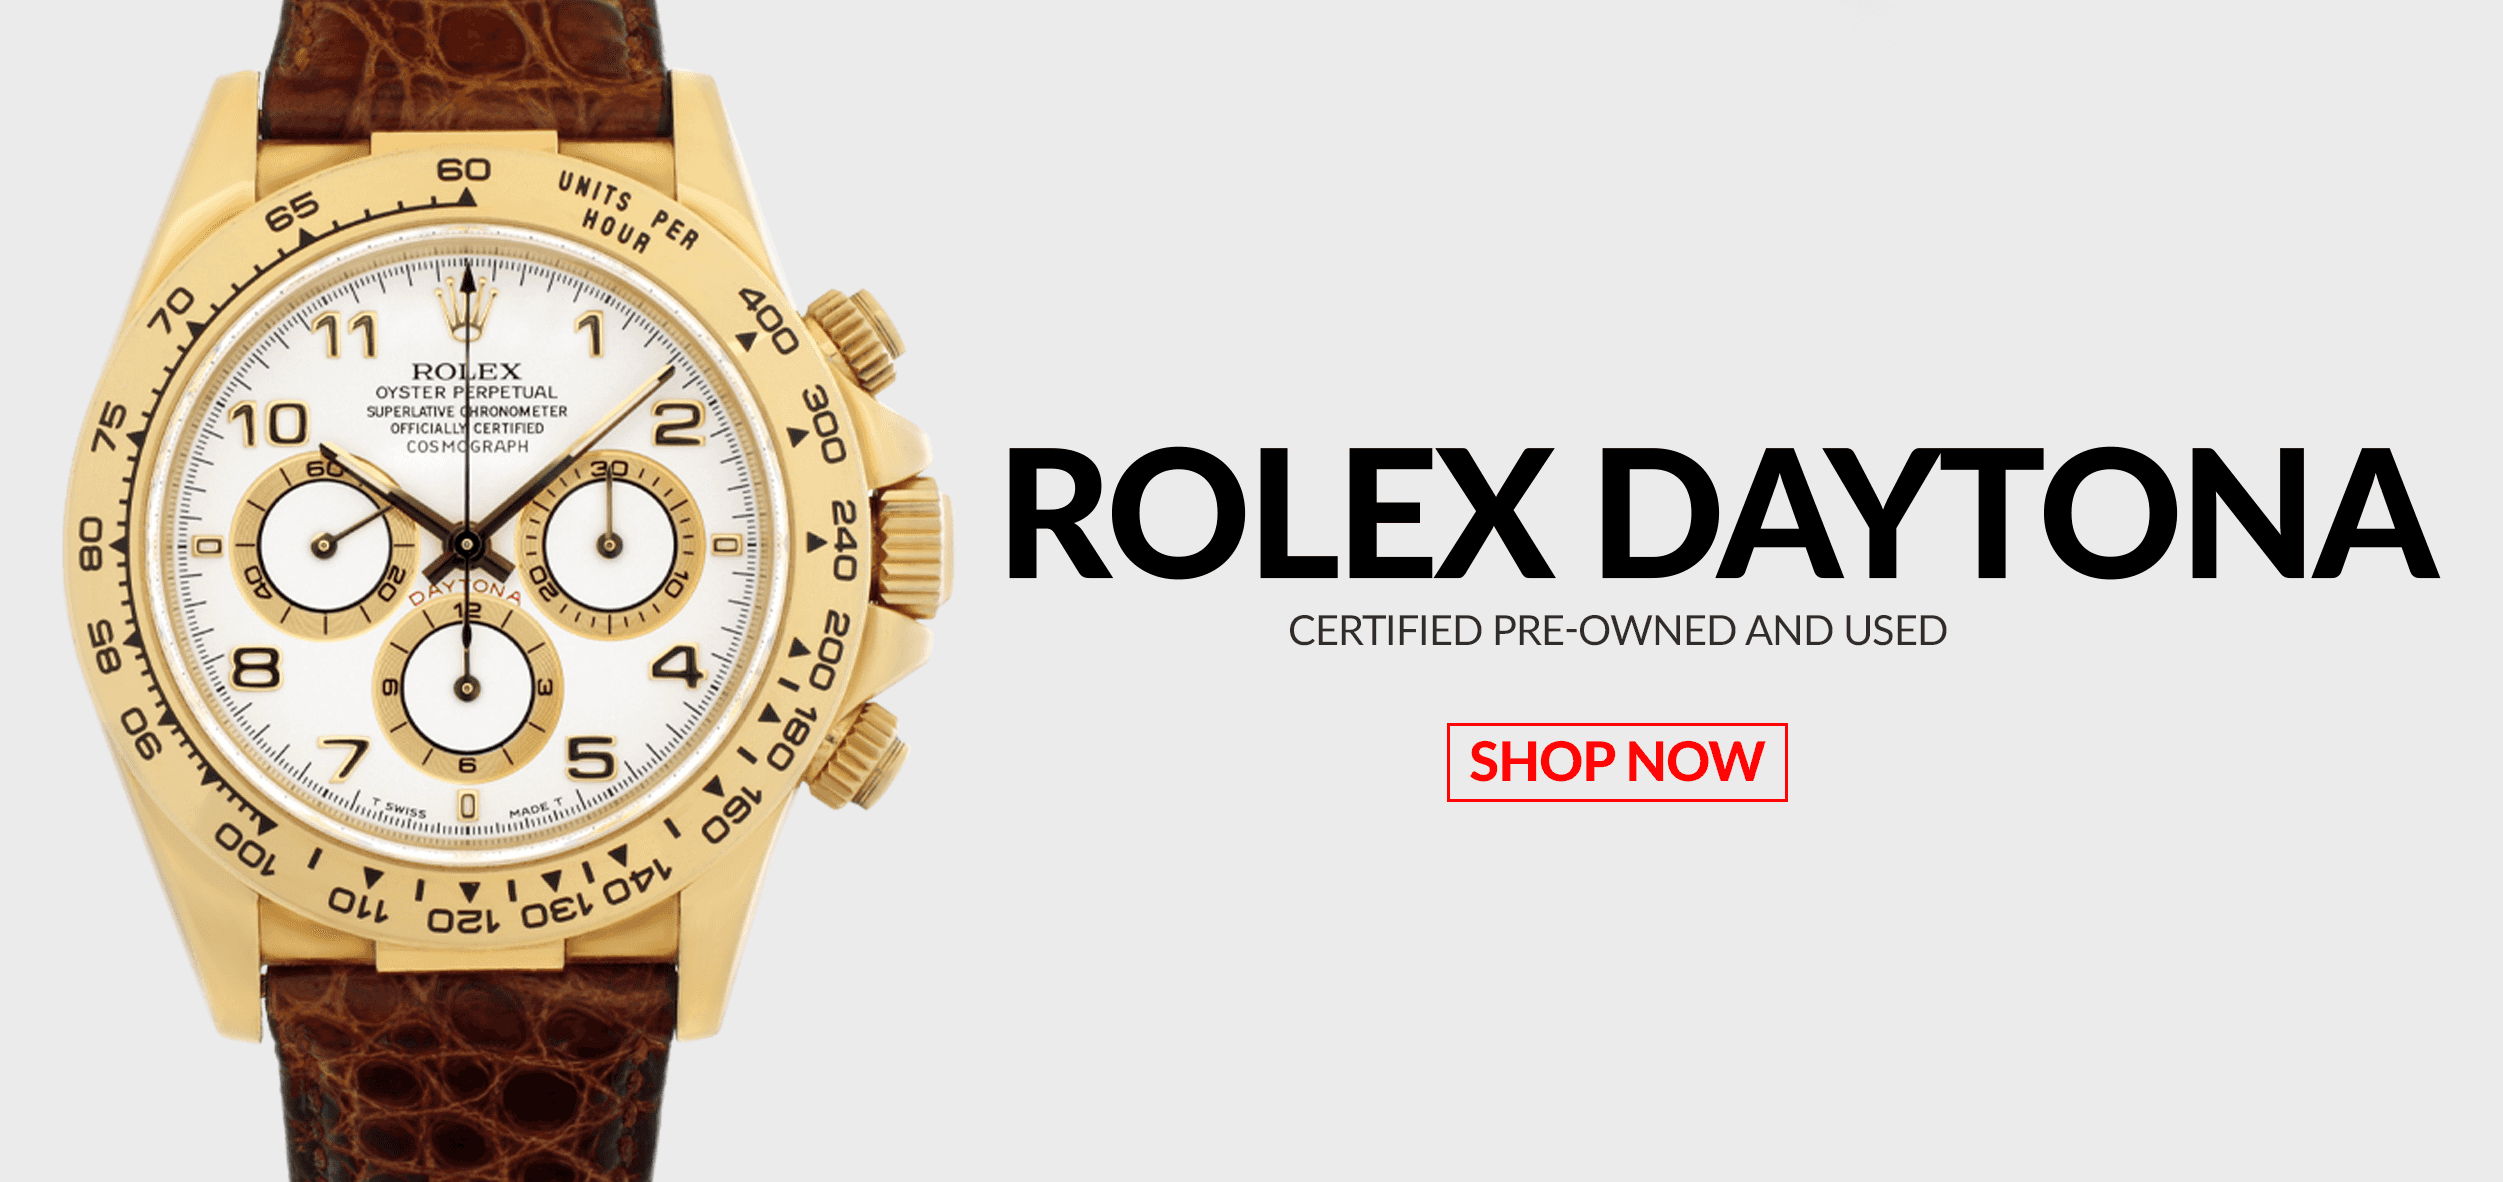 Pre-Owned Certified Used Rolex Daytona Watches Header